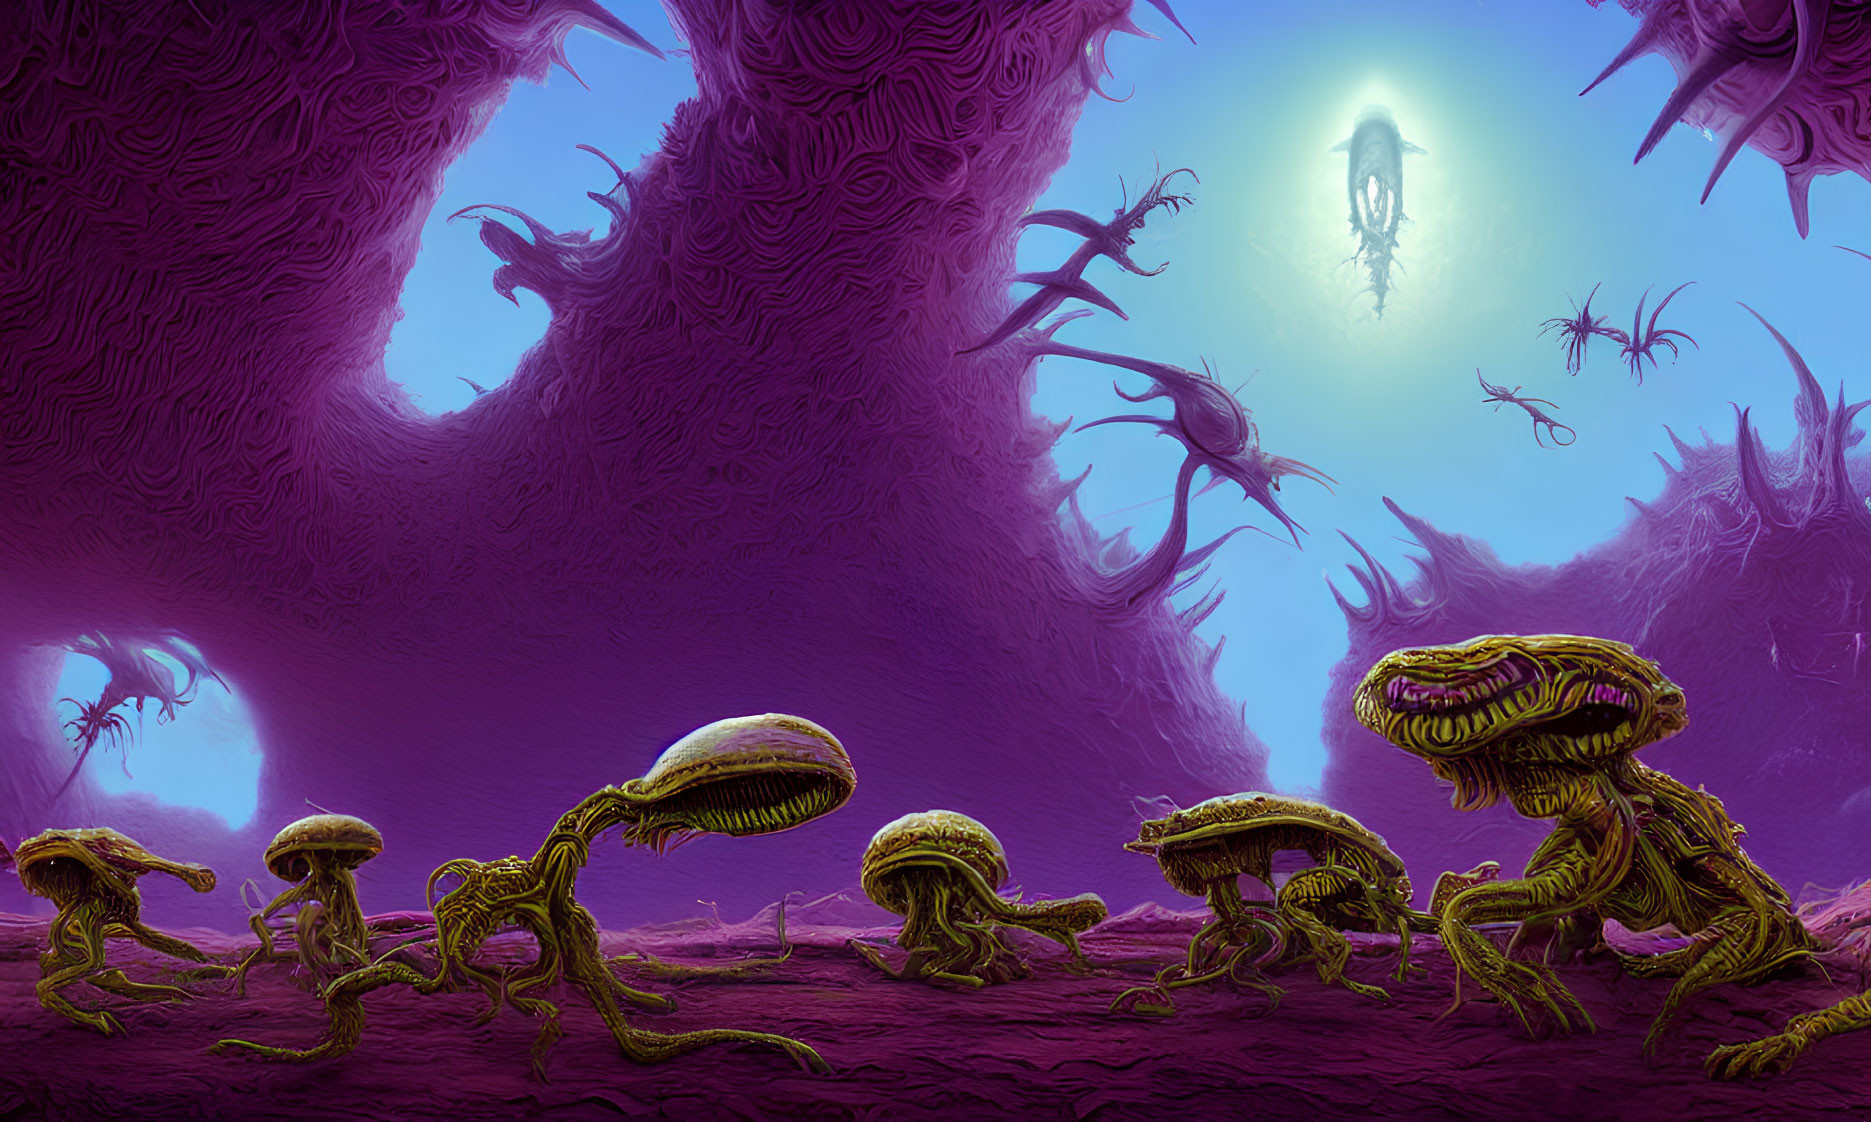 Alien landscape with purple hues, tentacled creatures, and giant spiders